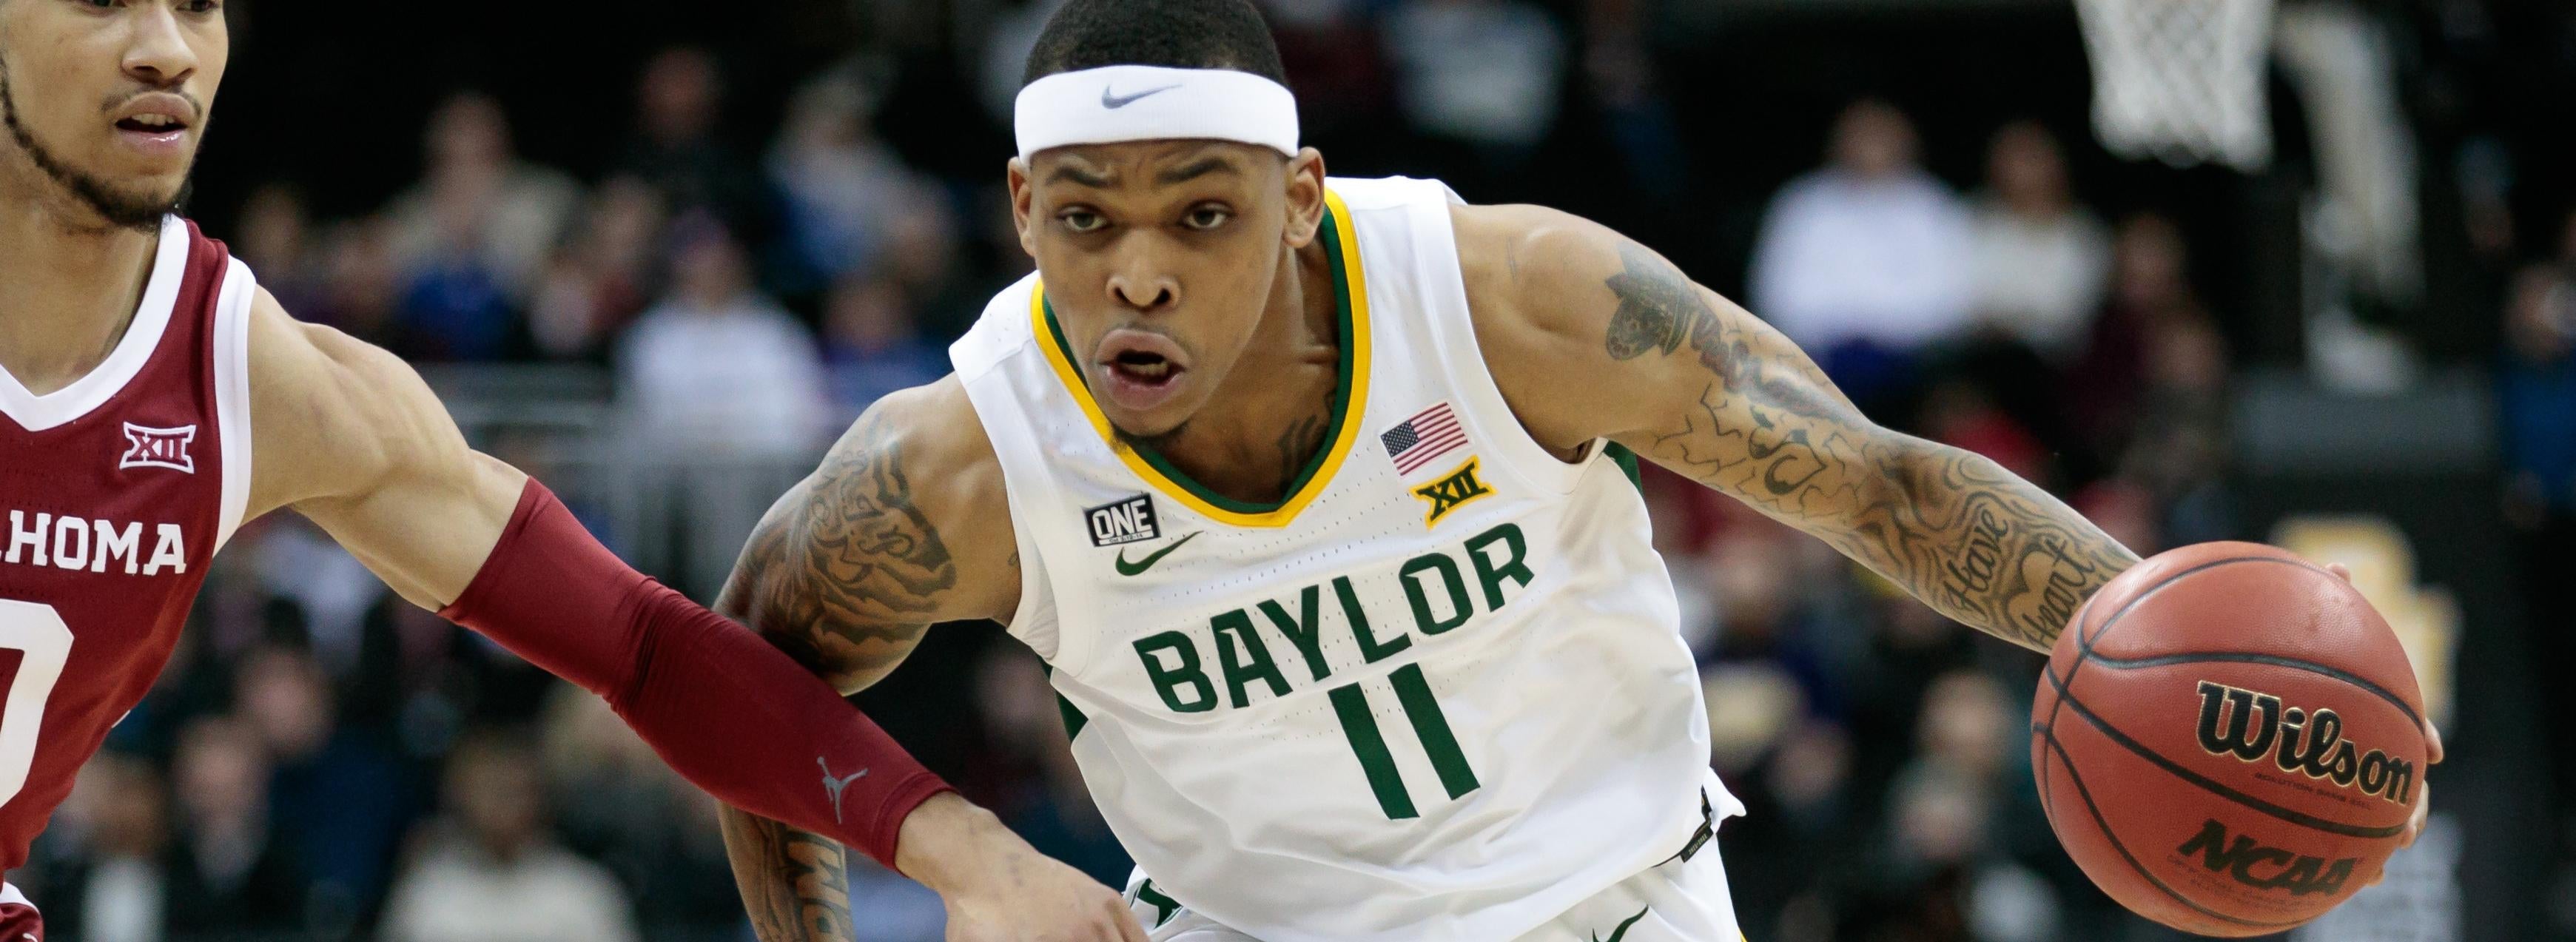 2022 NCAA Tournament Norfolk State vs. Baylor odds, predictions